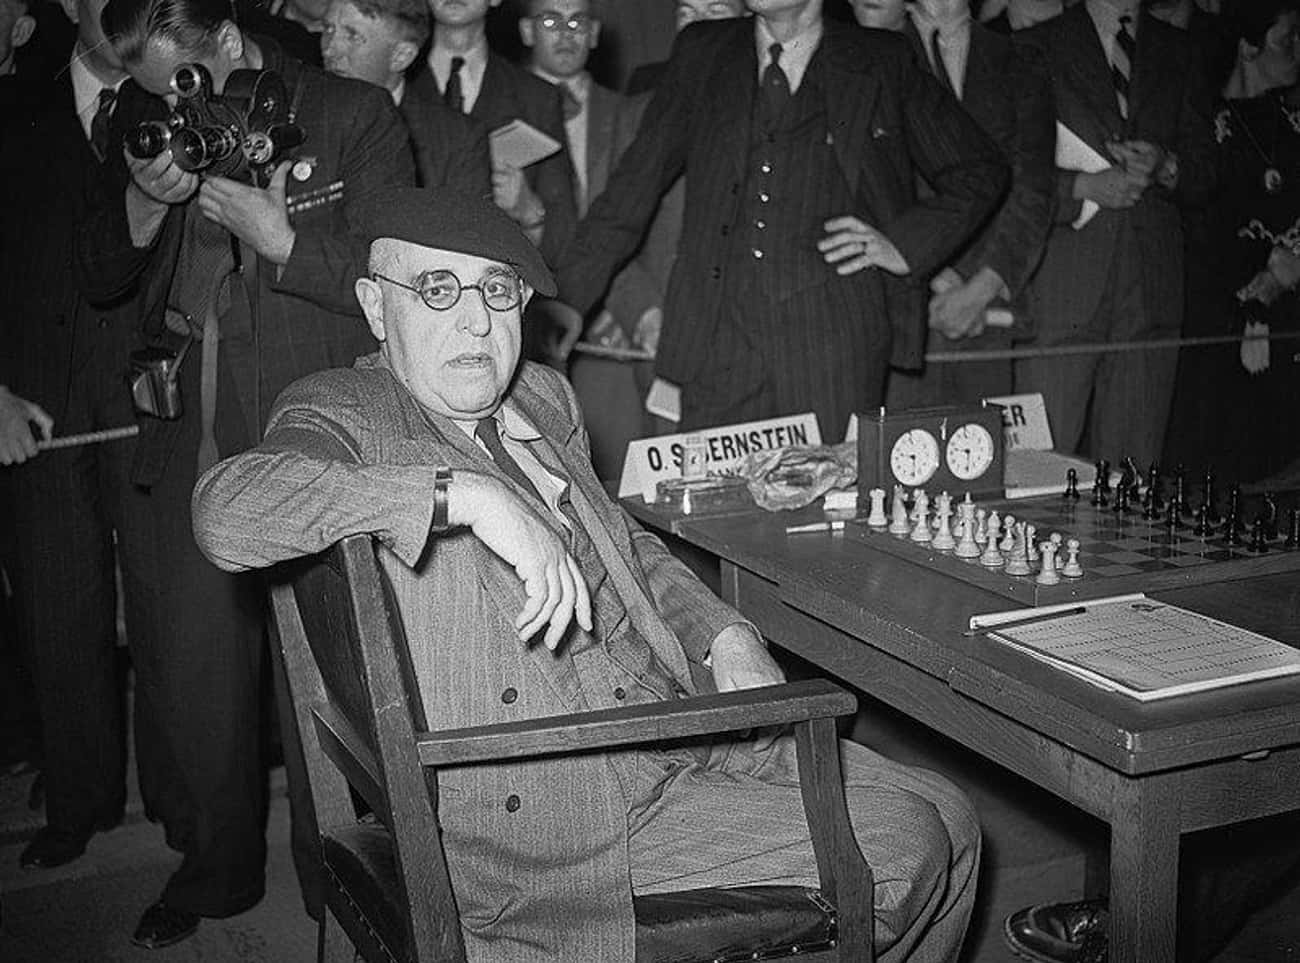 Chess Master Ossip Bernstein Reportedly Escaped Death Thanks To His Chess Skills